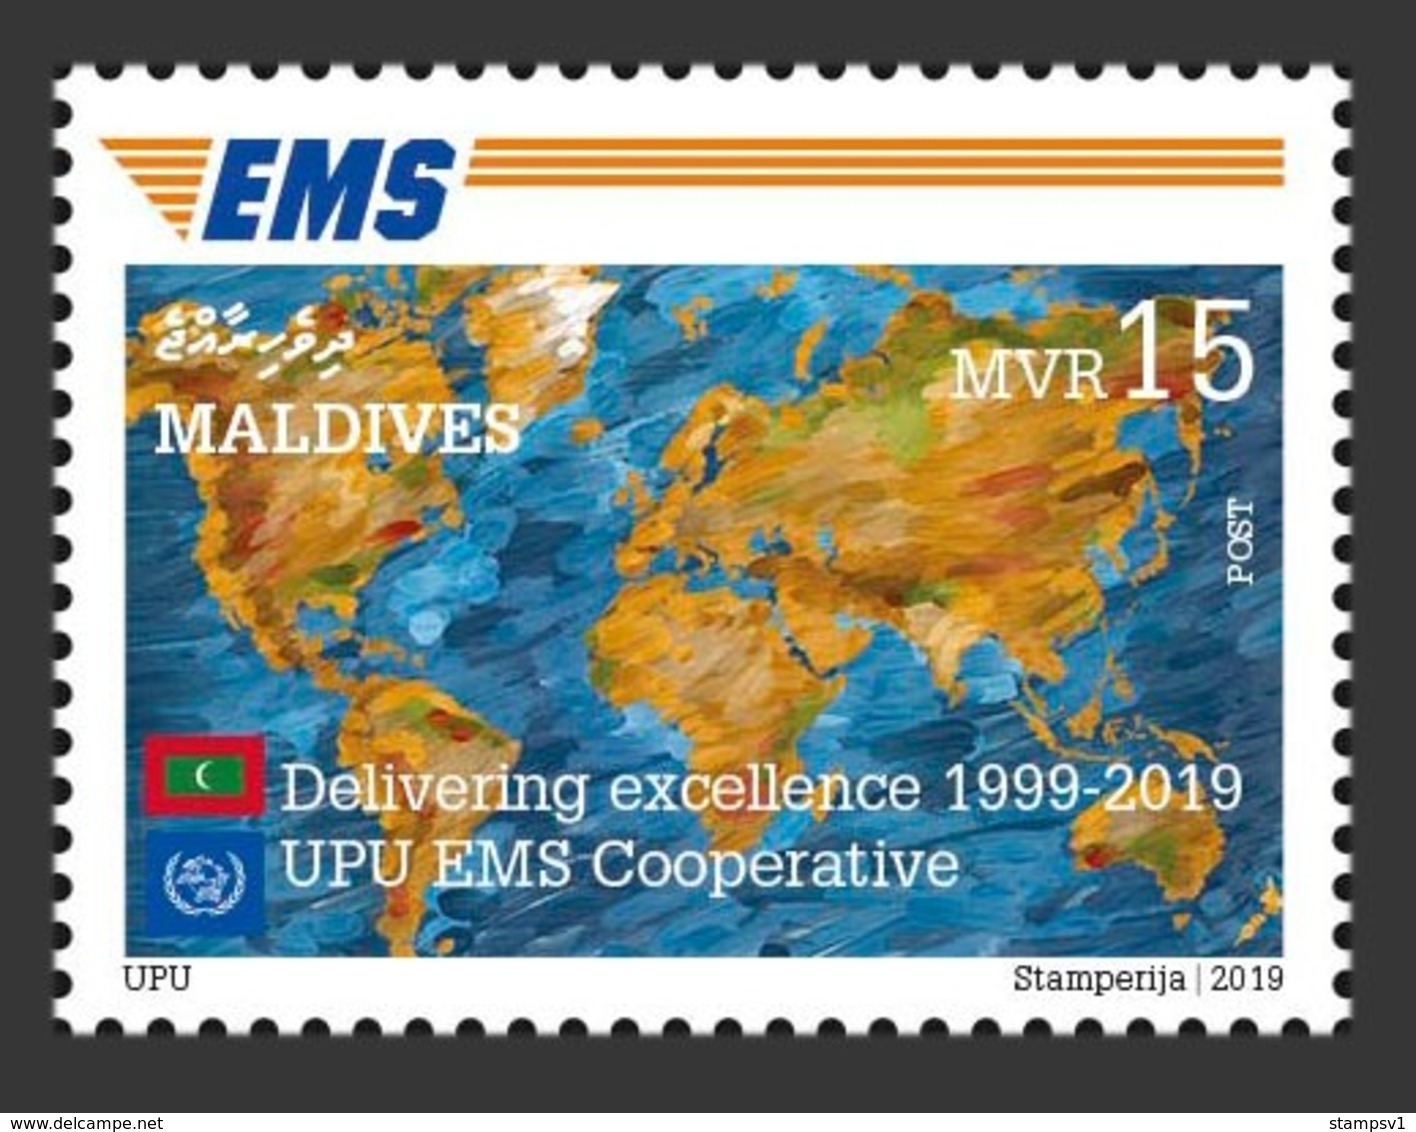 Maldives. 2019  Delivering Excellence 1999-2019, UPU EMS Cooperative.. (0201aL)  LOCAL ISSUE - Post